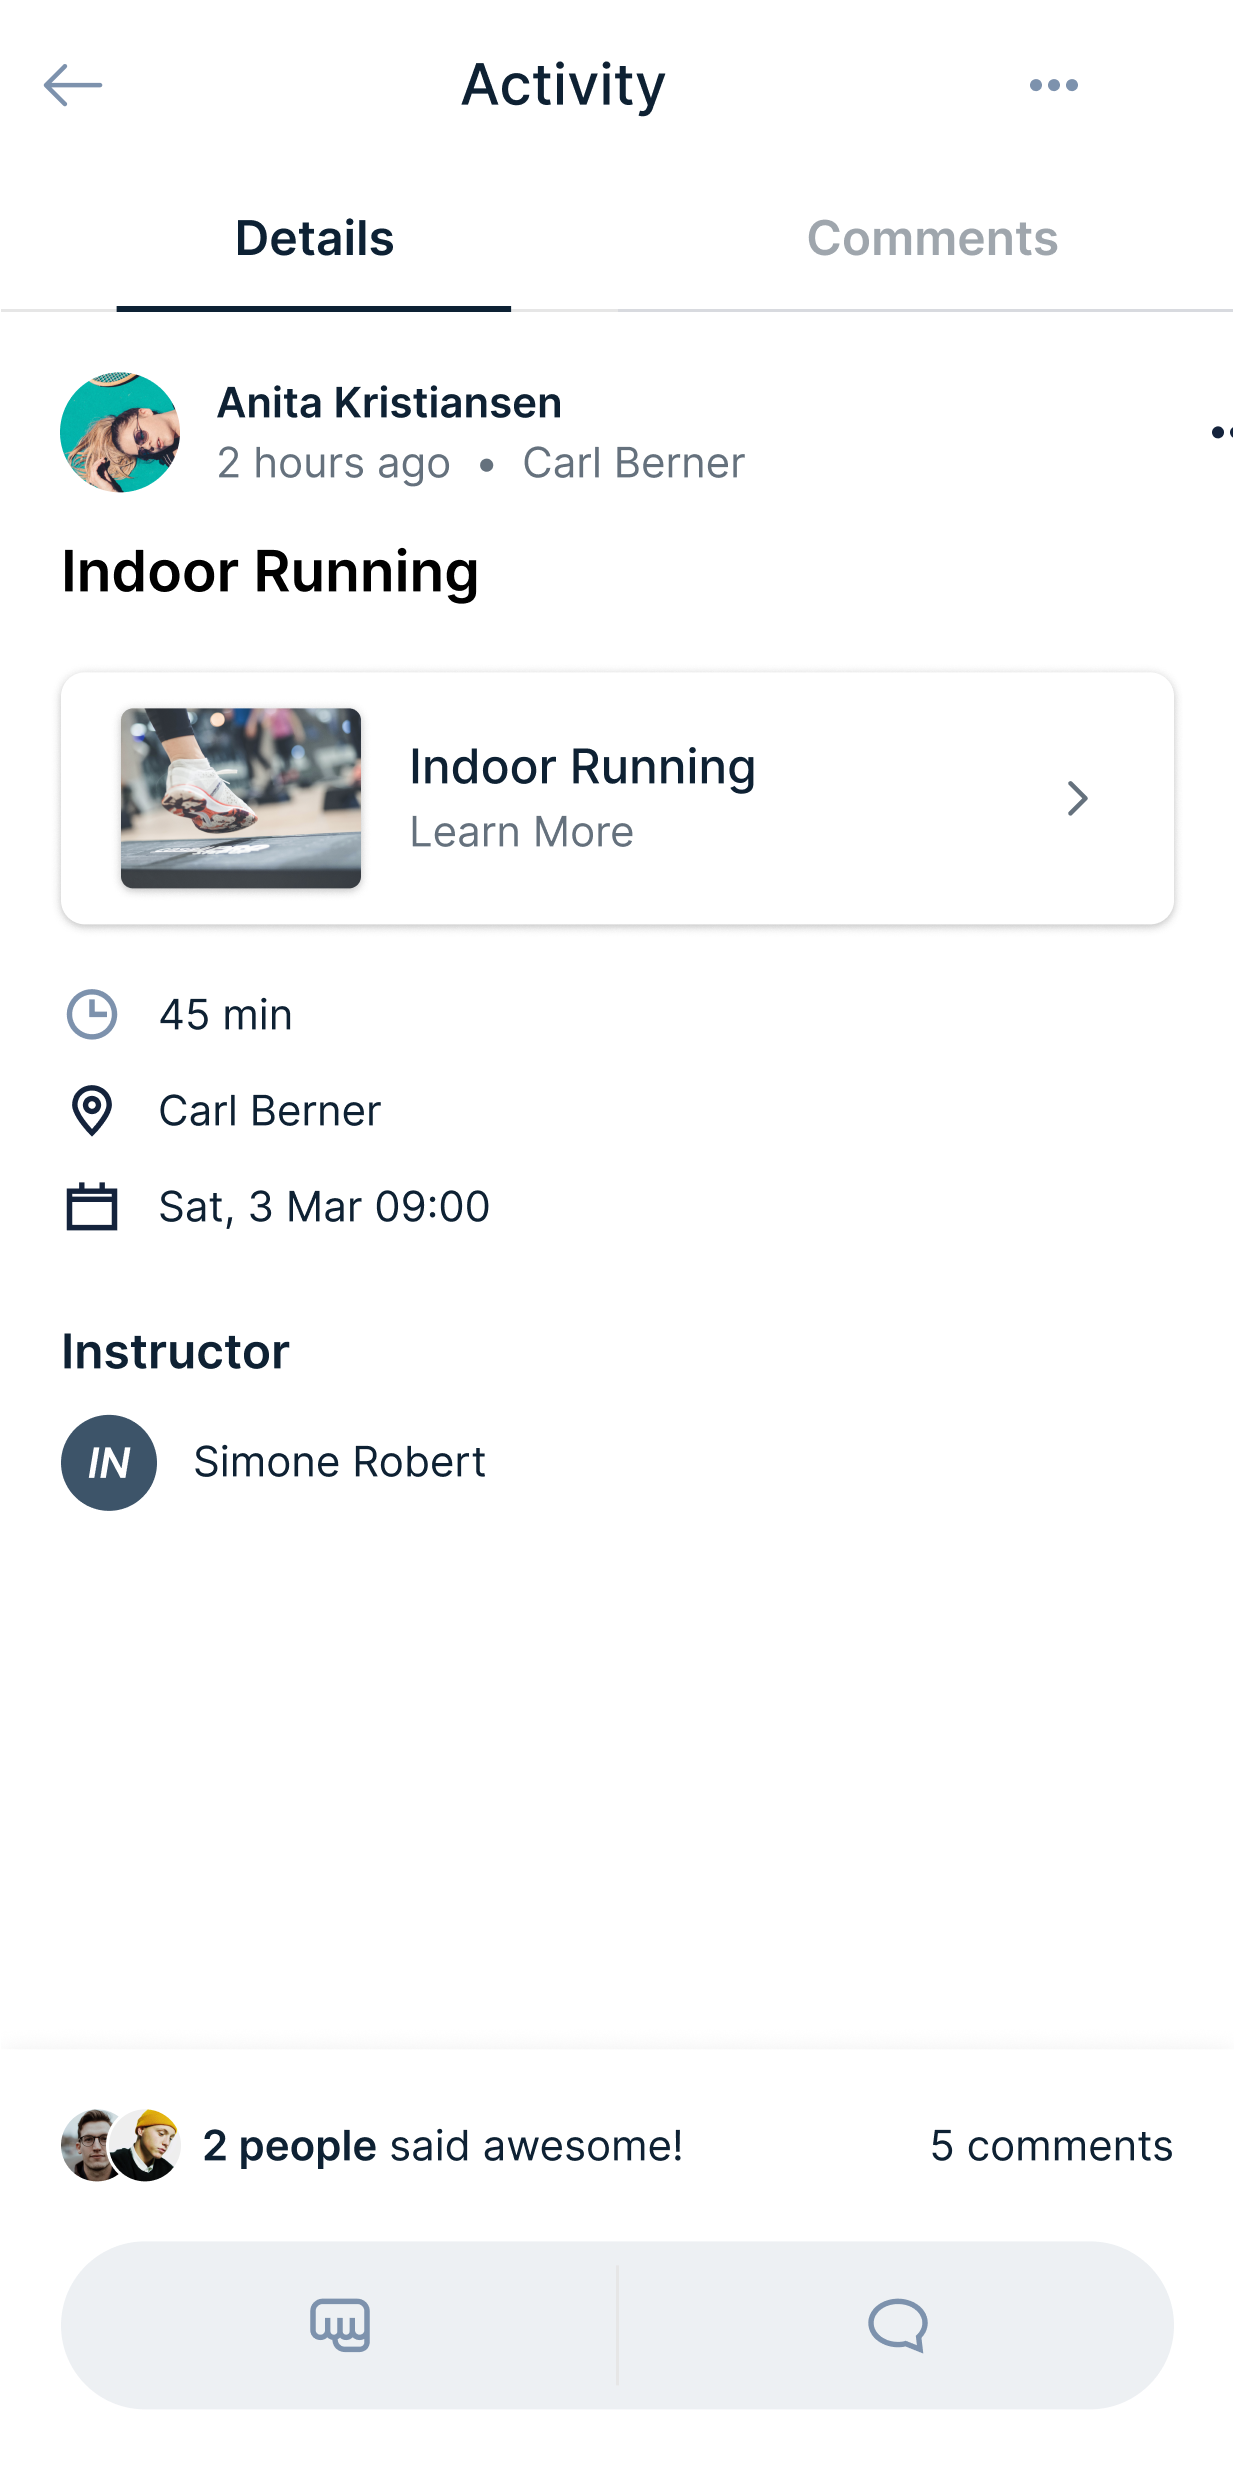 My profile completed training activity details (1)